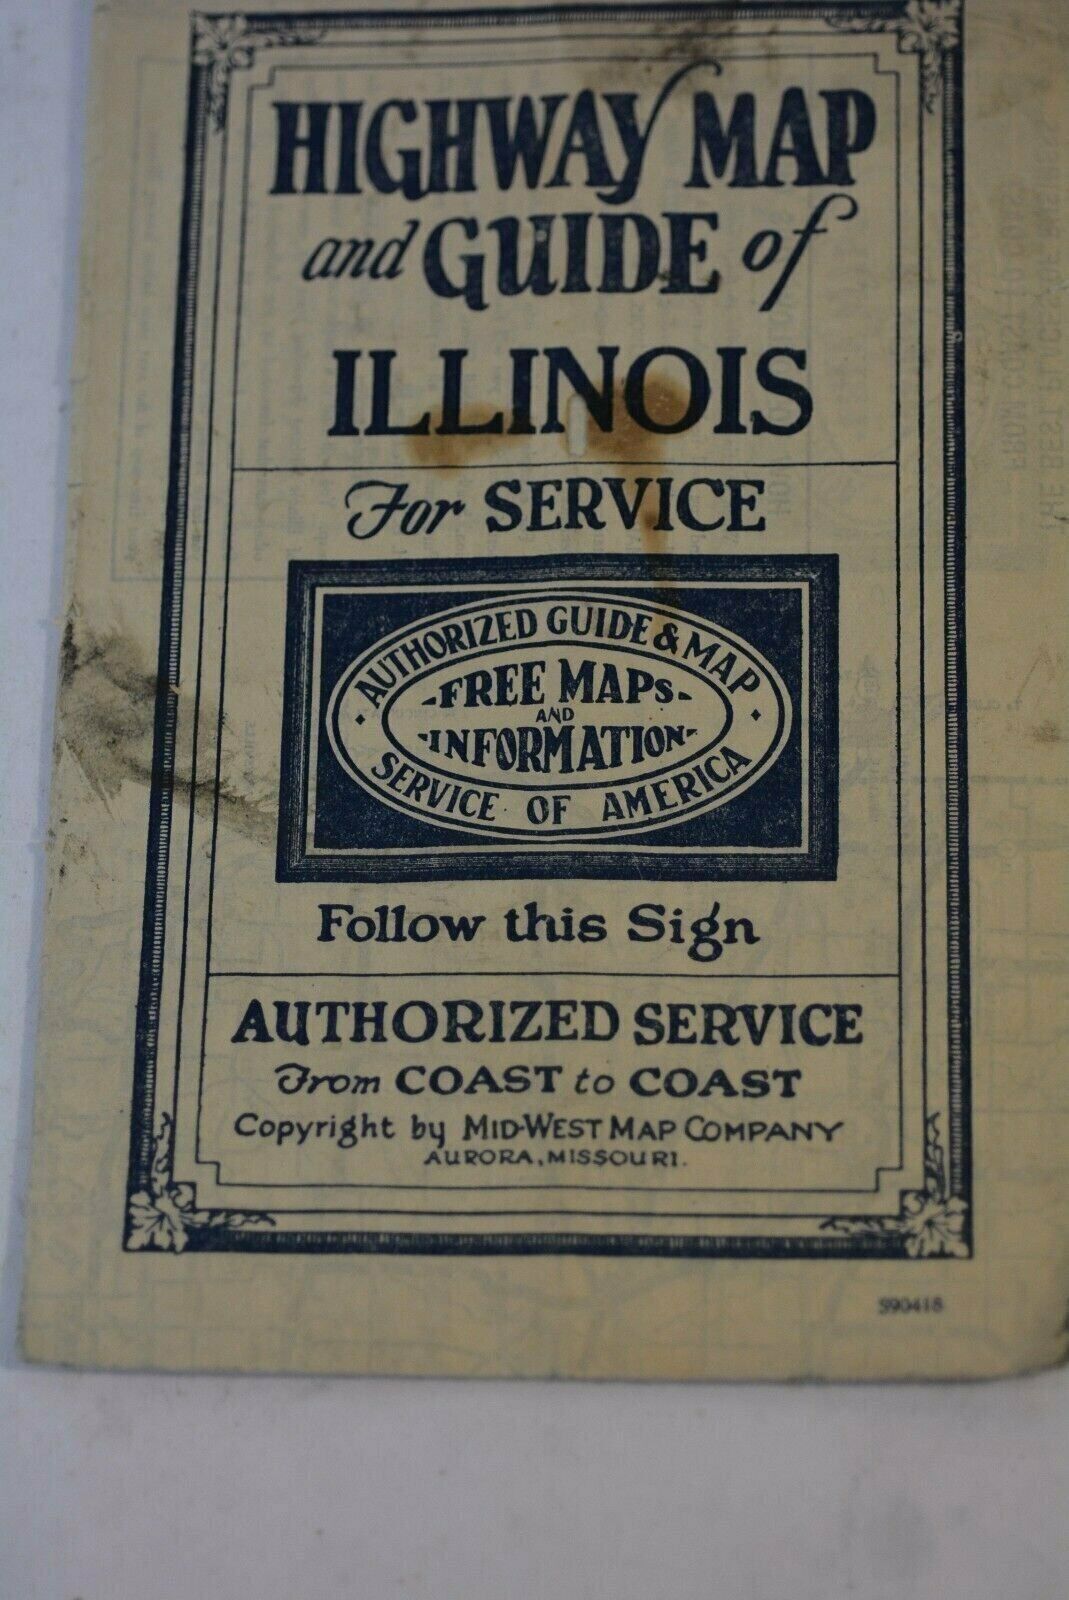 MID-WEST MAP COMPANY.Early HIGHWAY MAP and GUIDE of ILLINOIS circa 1928 folded